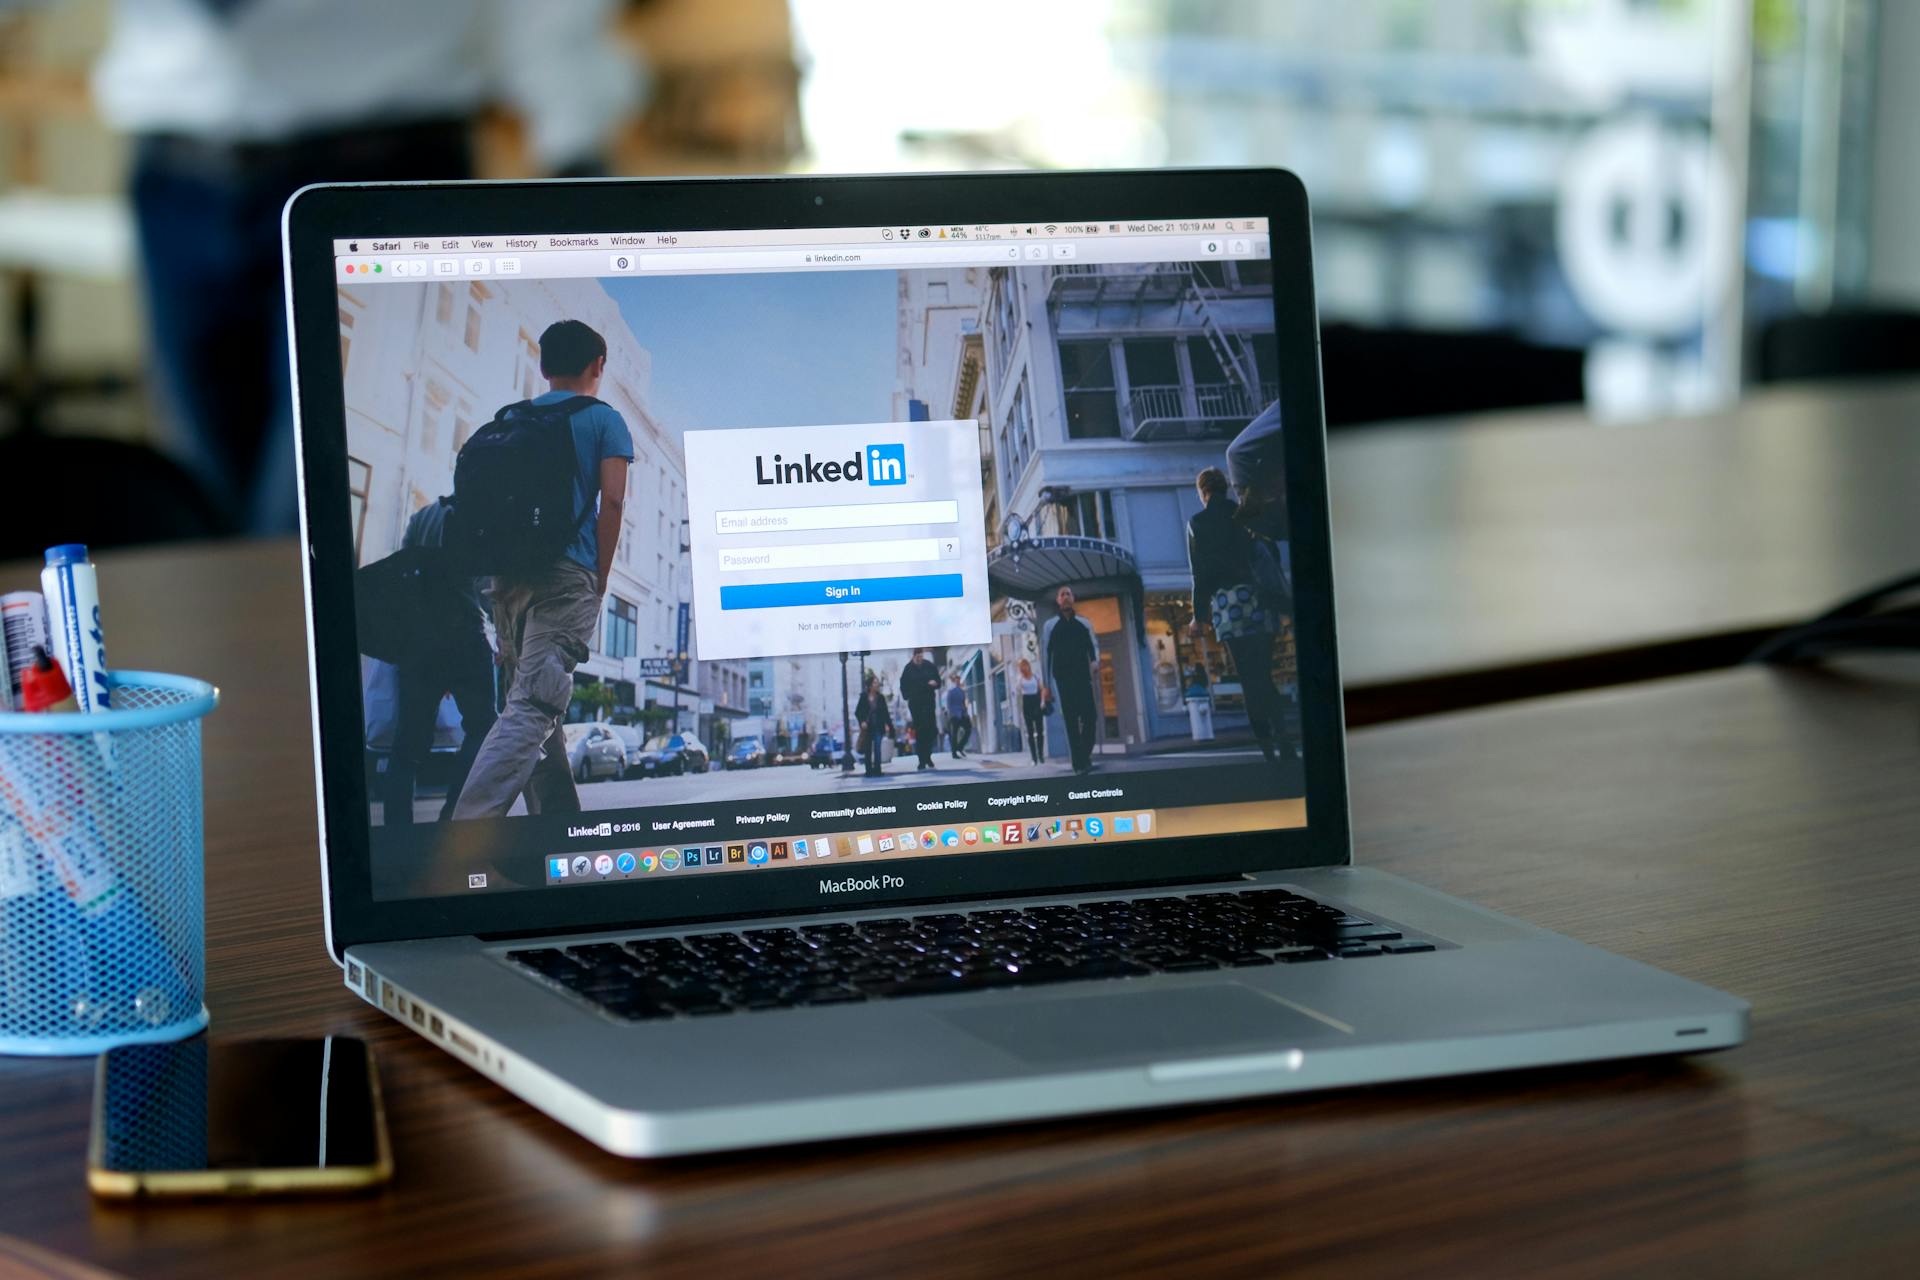 A laptop on a desk with the LinkedIn homepage open